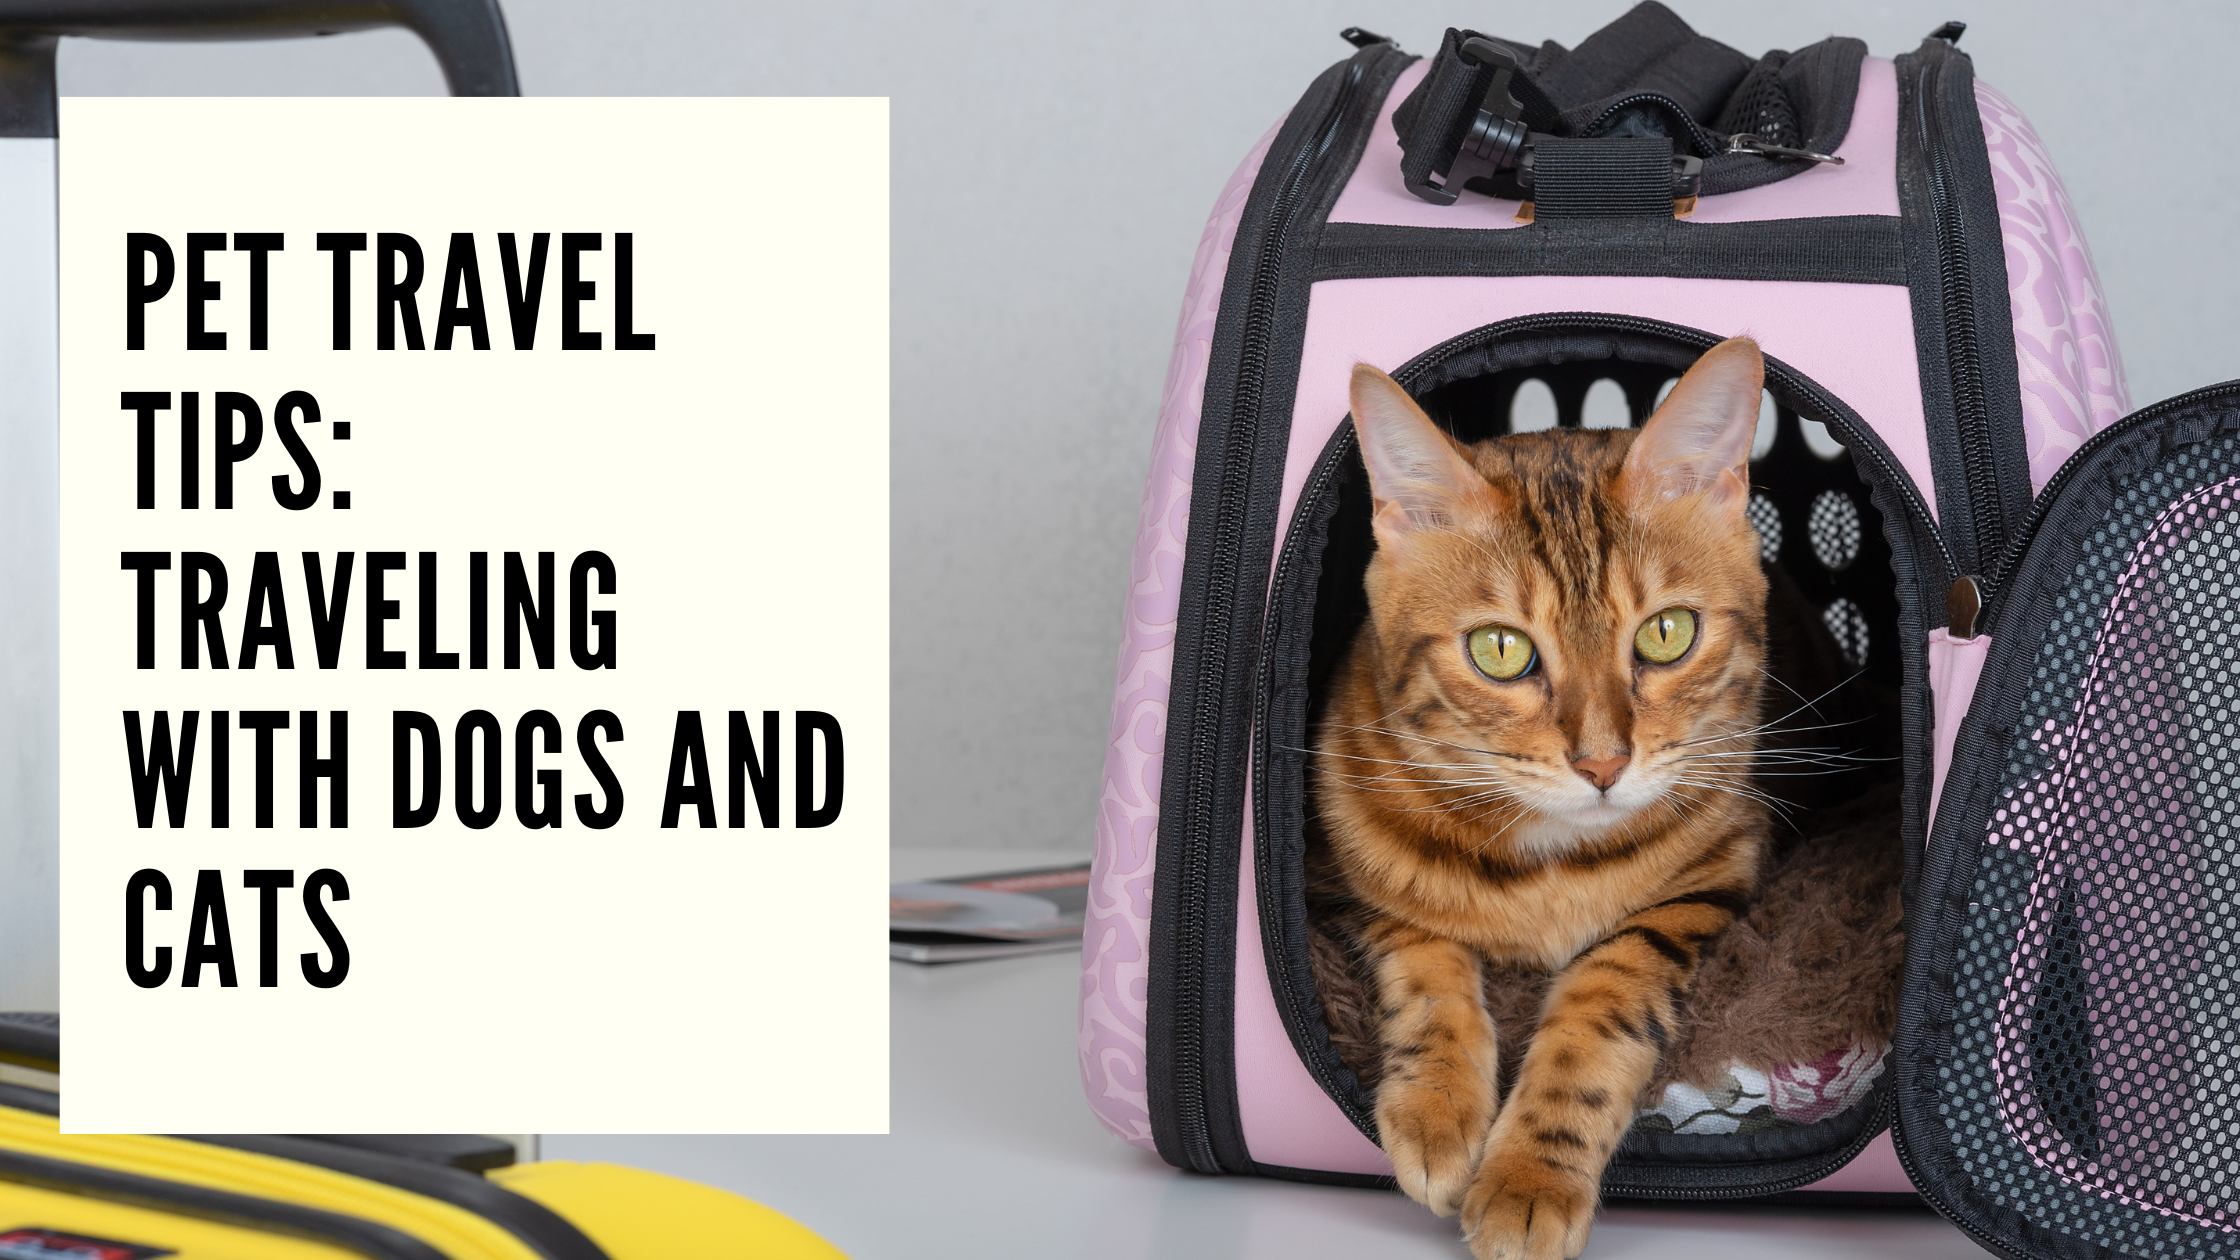 Pet Travel Tips Traveling with Dogs and Cats